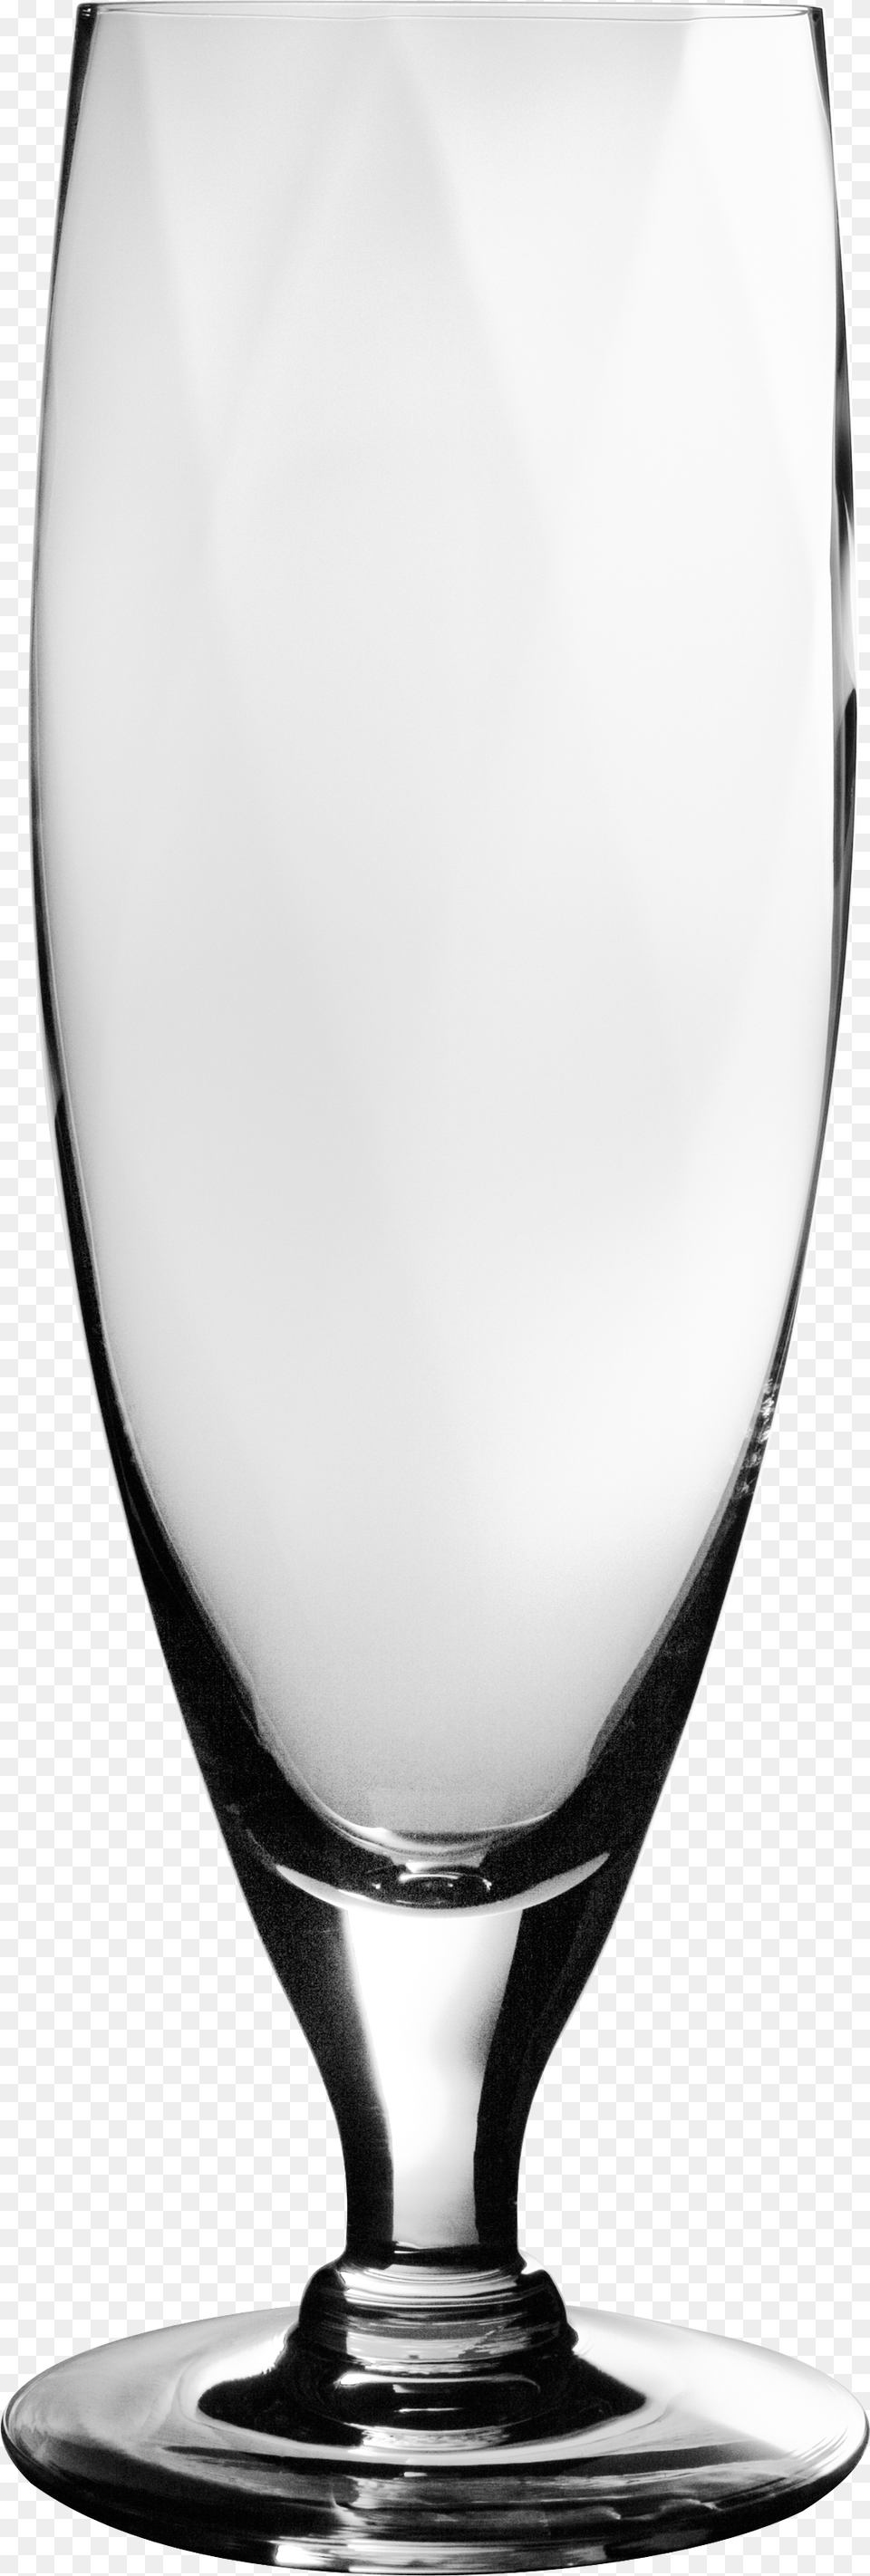 Empty Glass Kosta Boda Chateau Beer Glass 35 Cl 35 Cl, Goblet, Alcohol, Beverage, Liquor Png